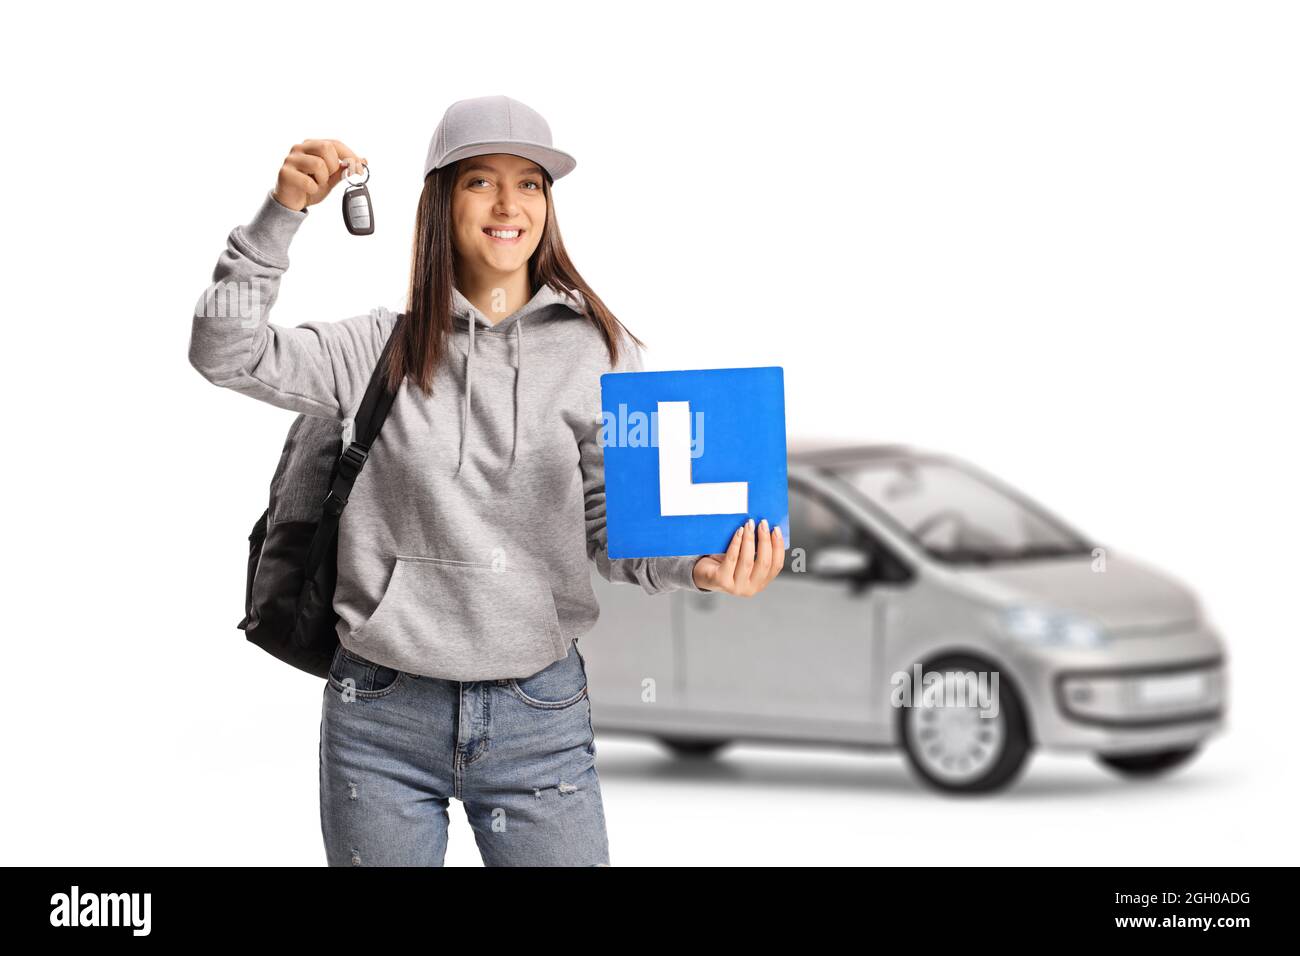 Female teen student holding a learner plate and a car key from a silver car isolated on white background Stock Photo